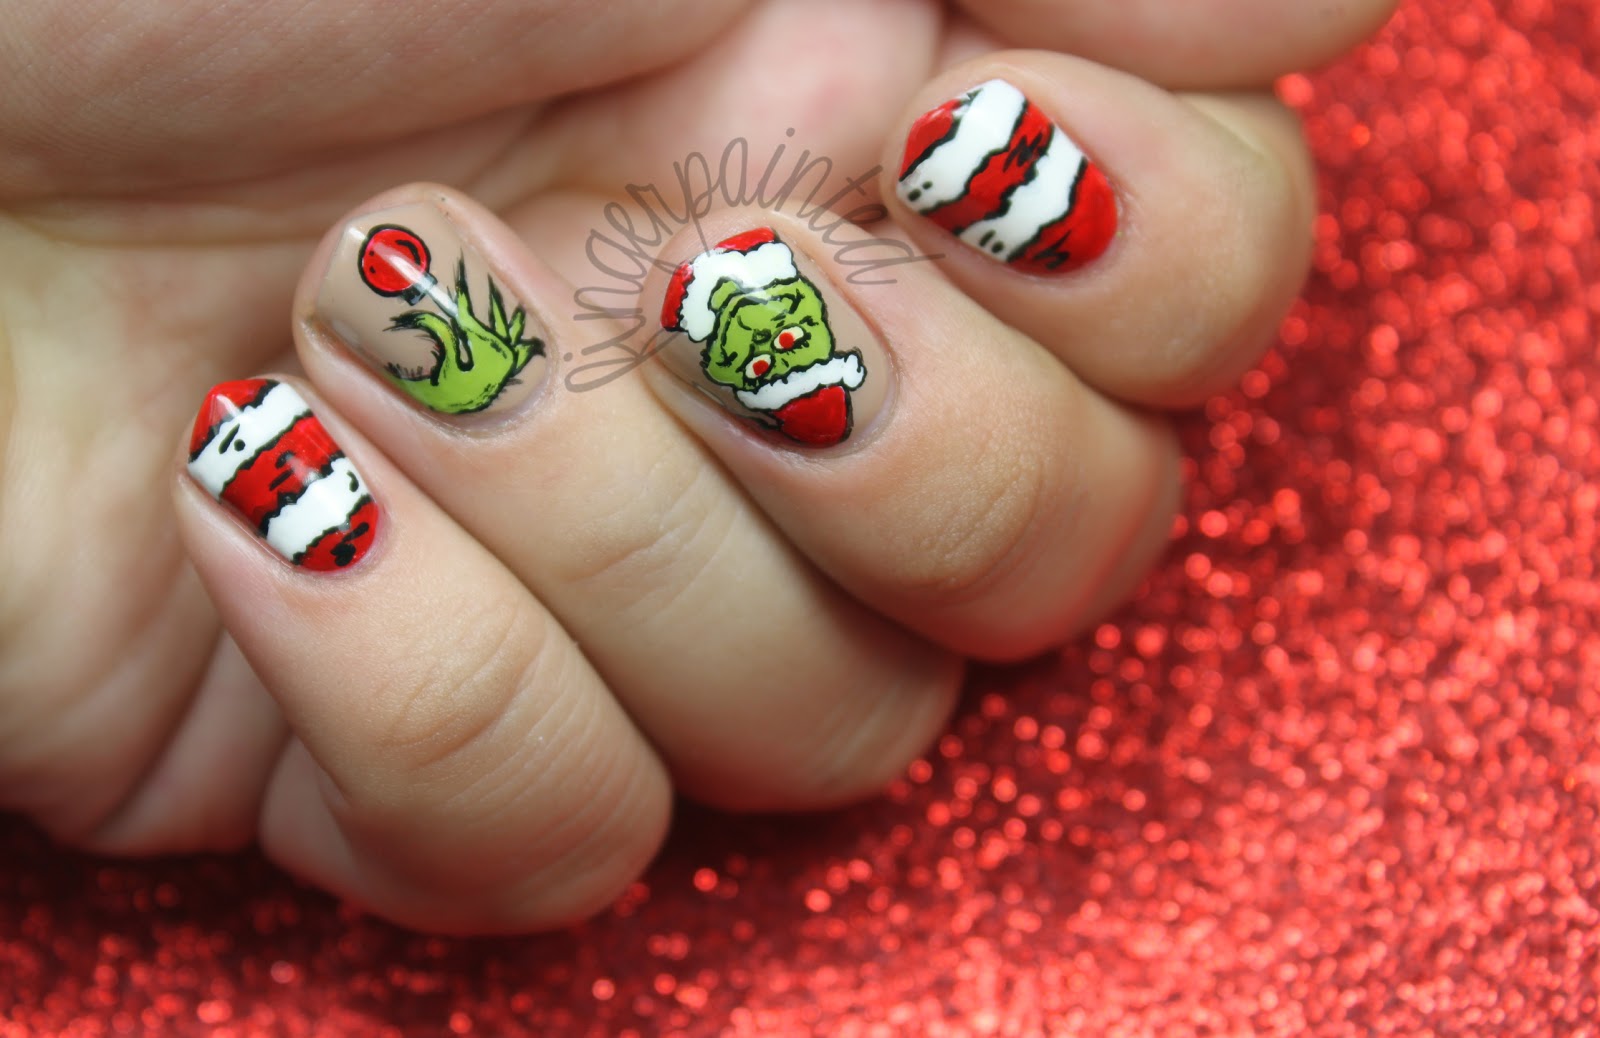 7. "The Grinch" Nail Design for Short Nails - wide 3